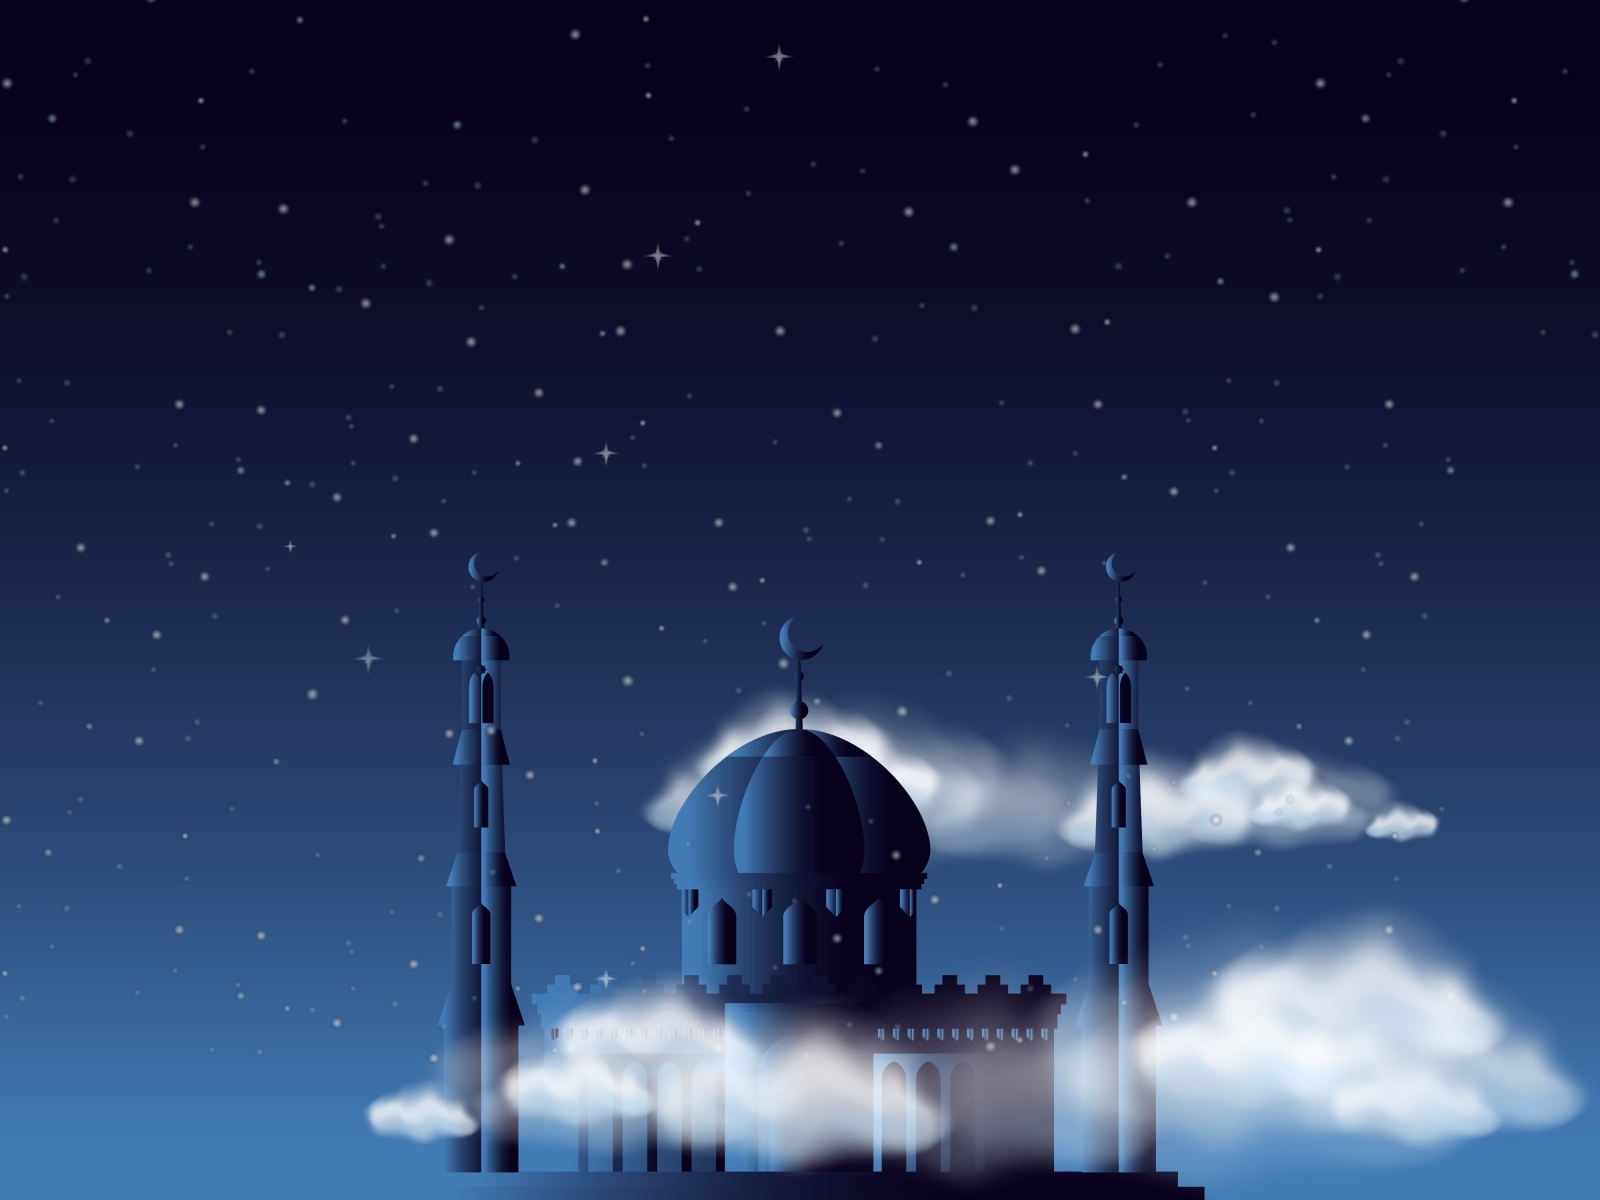 islamic background by sulismartin on Dribbble